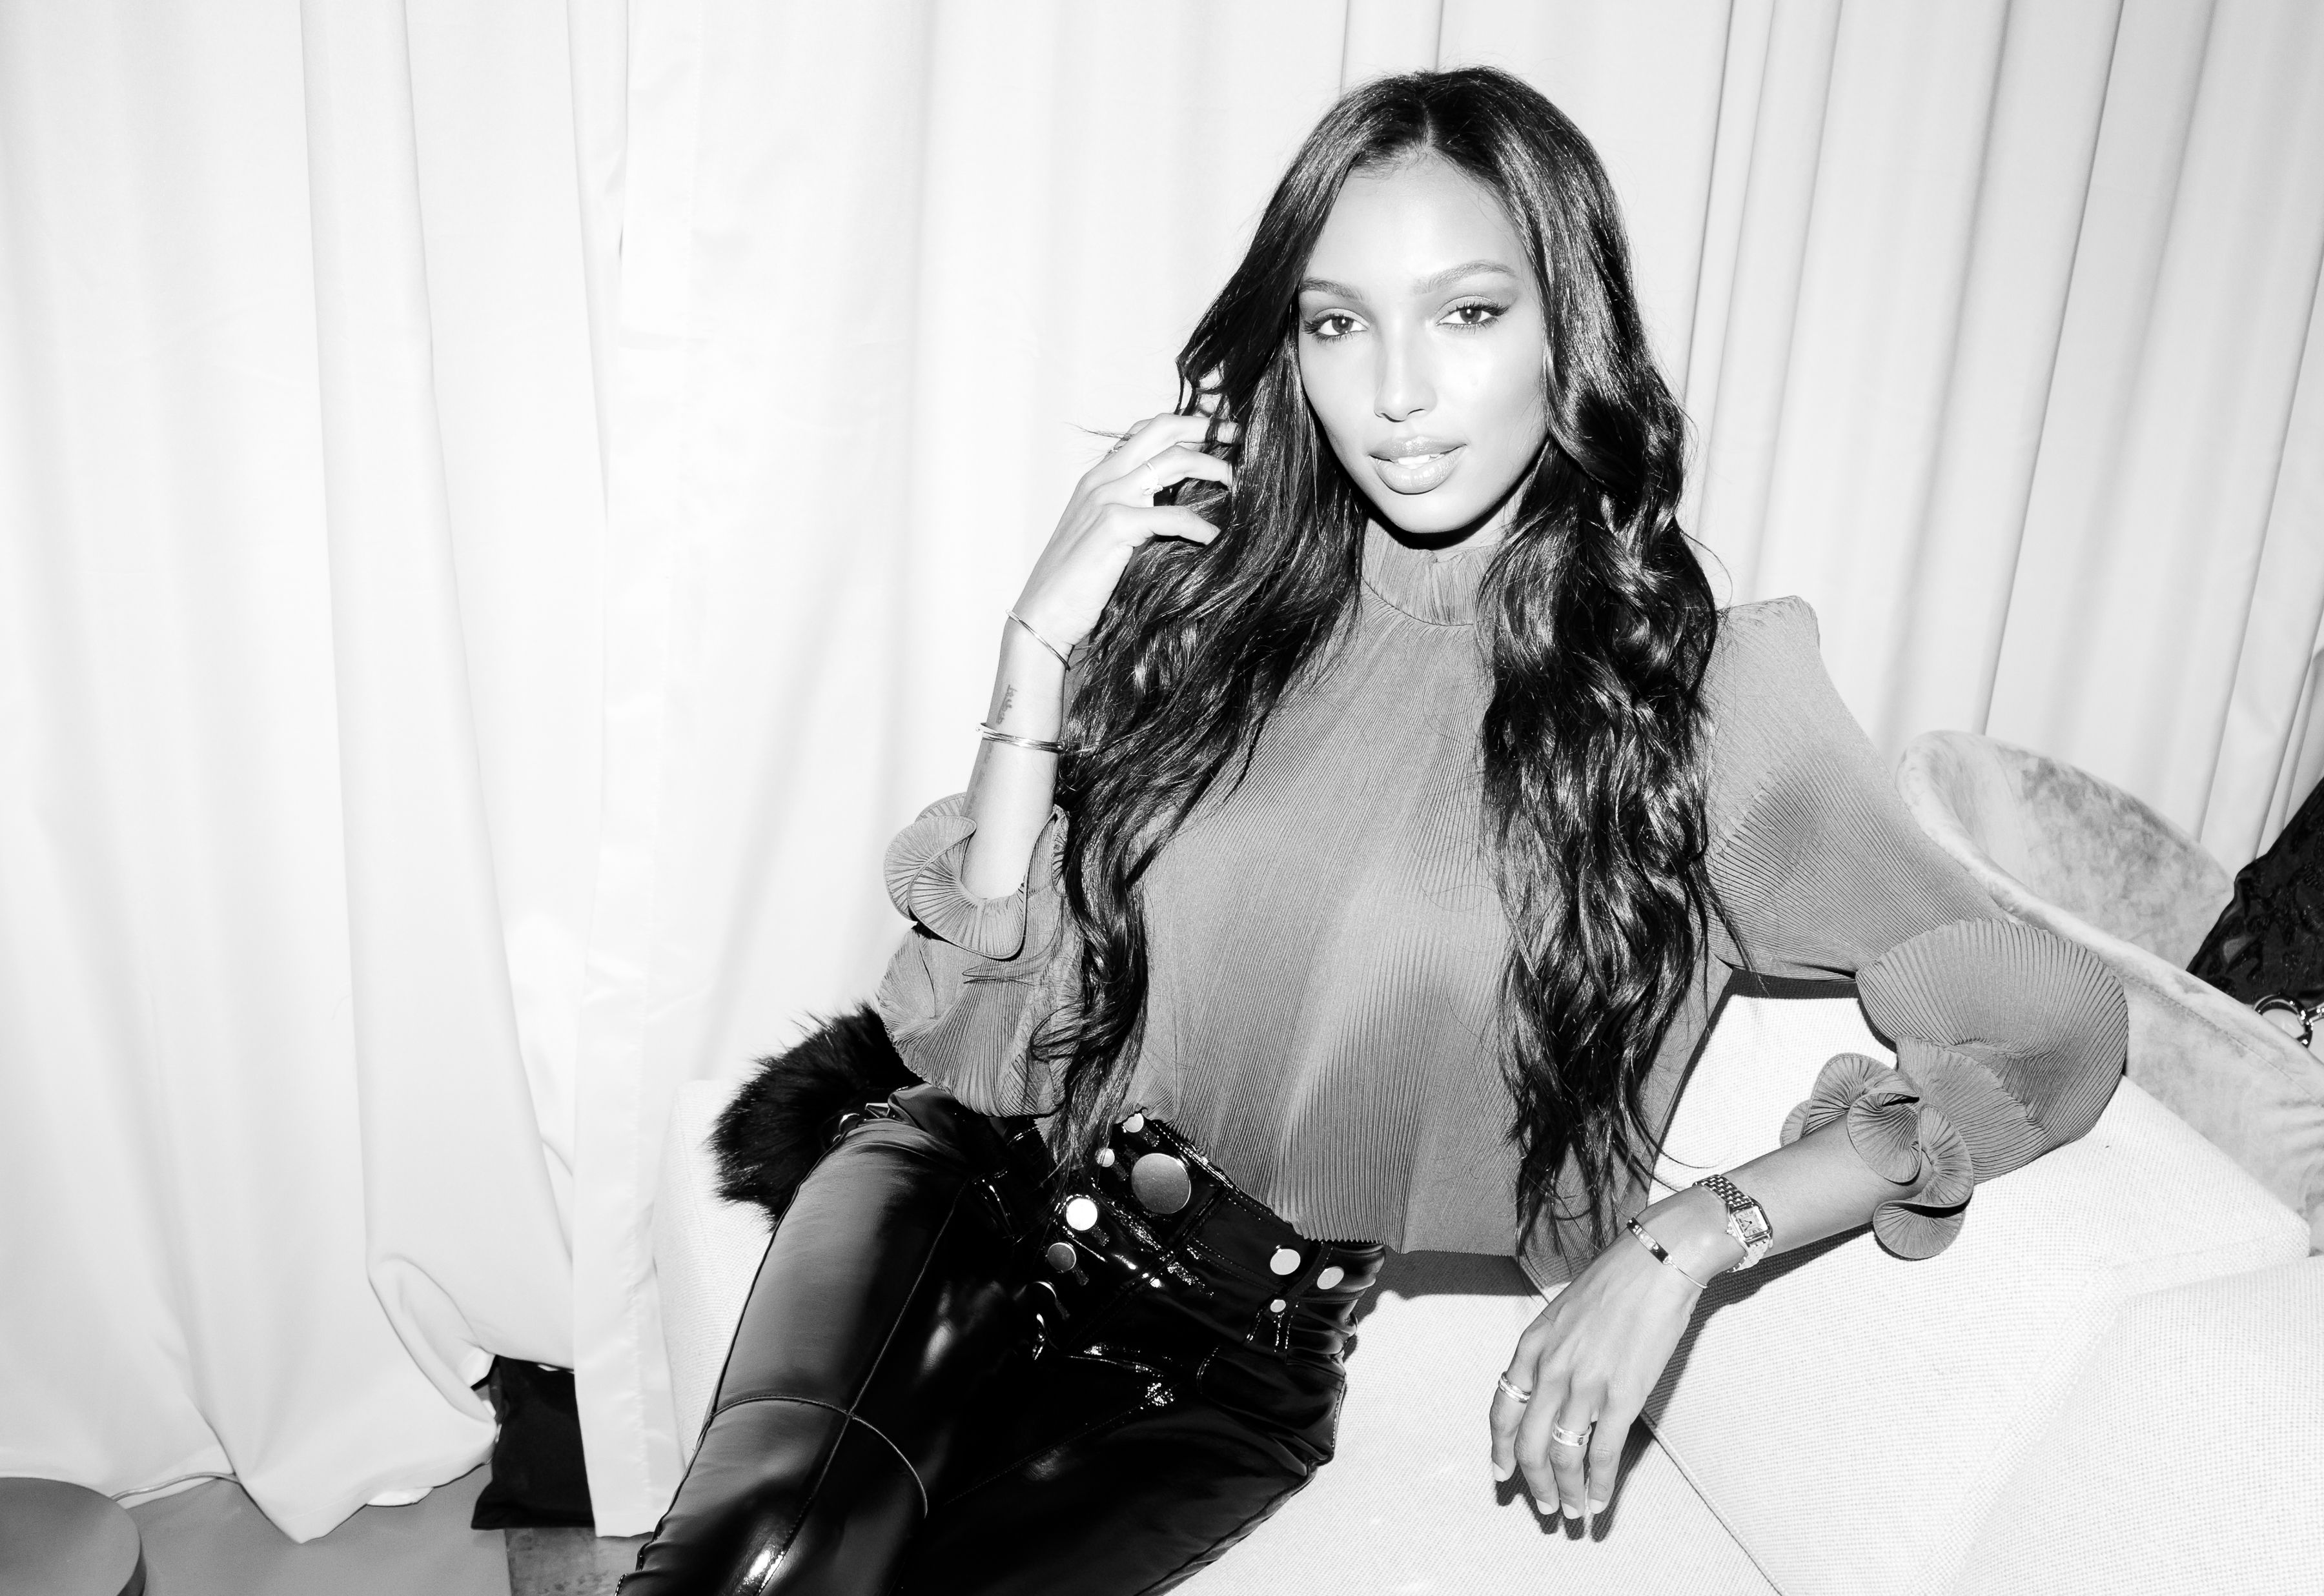 Jasmine Tookes attends Shopbop presents The Shopbop Diner